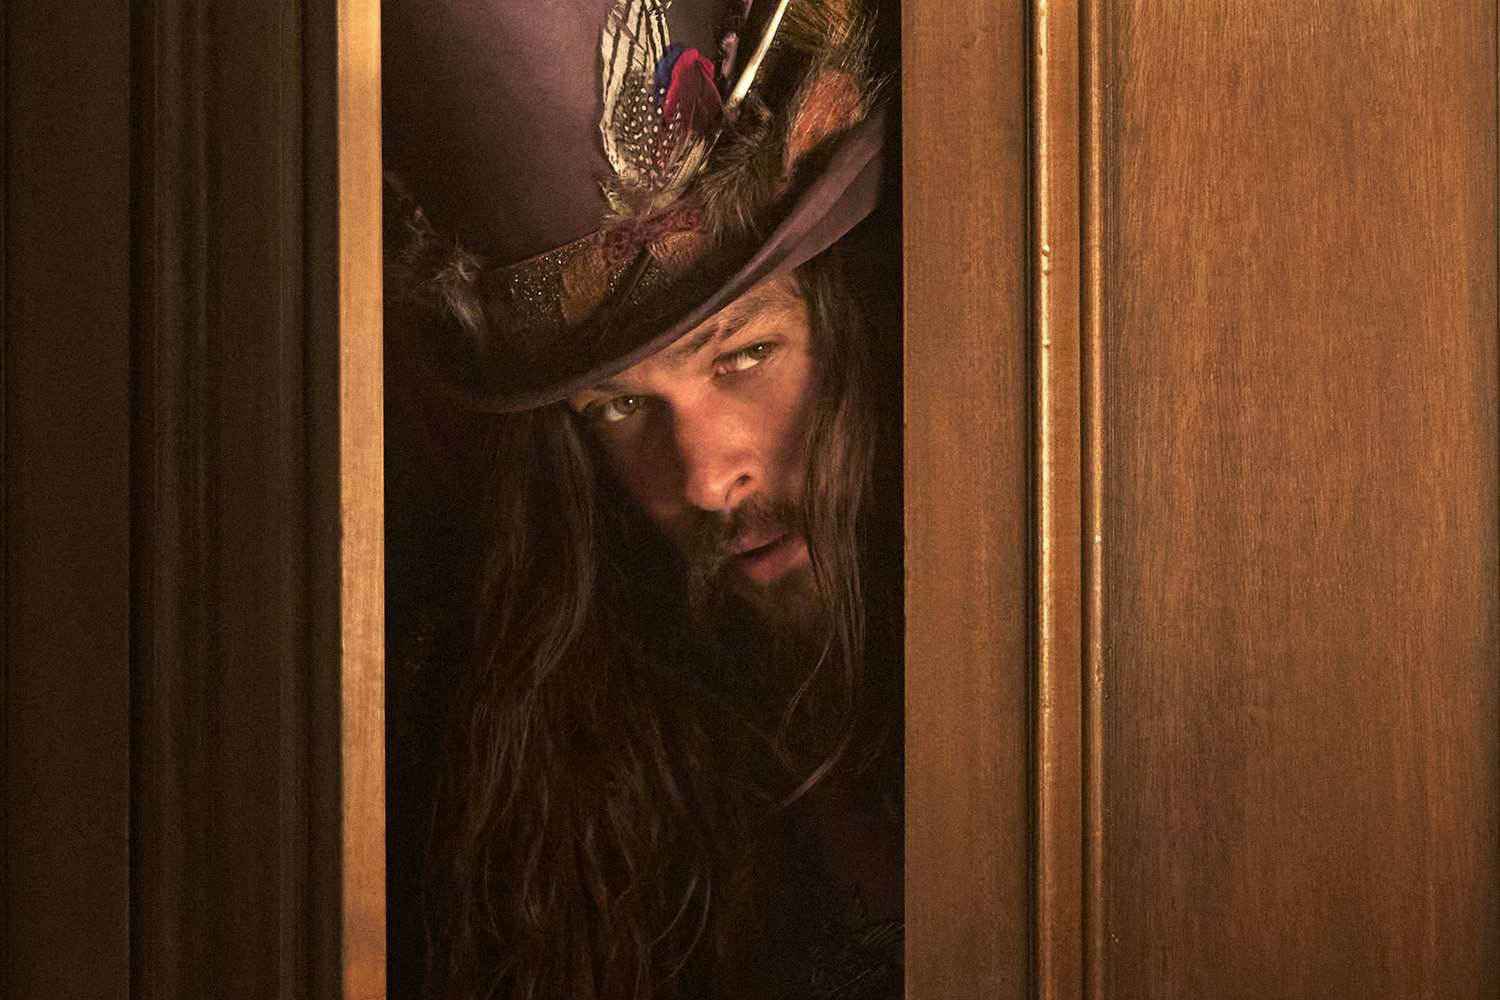 Enjoy this sneak peek behind the scenes at SLUMBERLAND, a new Netflix adventure film about an eccentric outlaw (Jason Momoa) who guides a young girl (Marlow Barkley) through a secret world of dreams and nightmares...